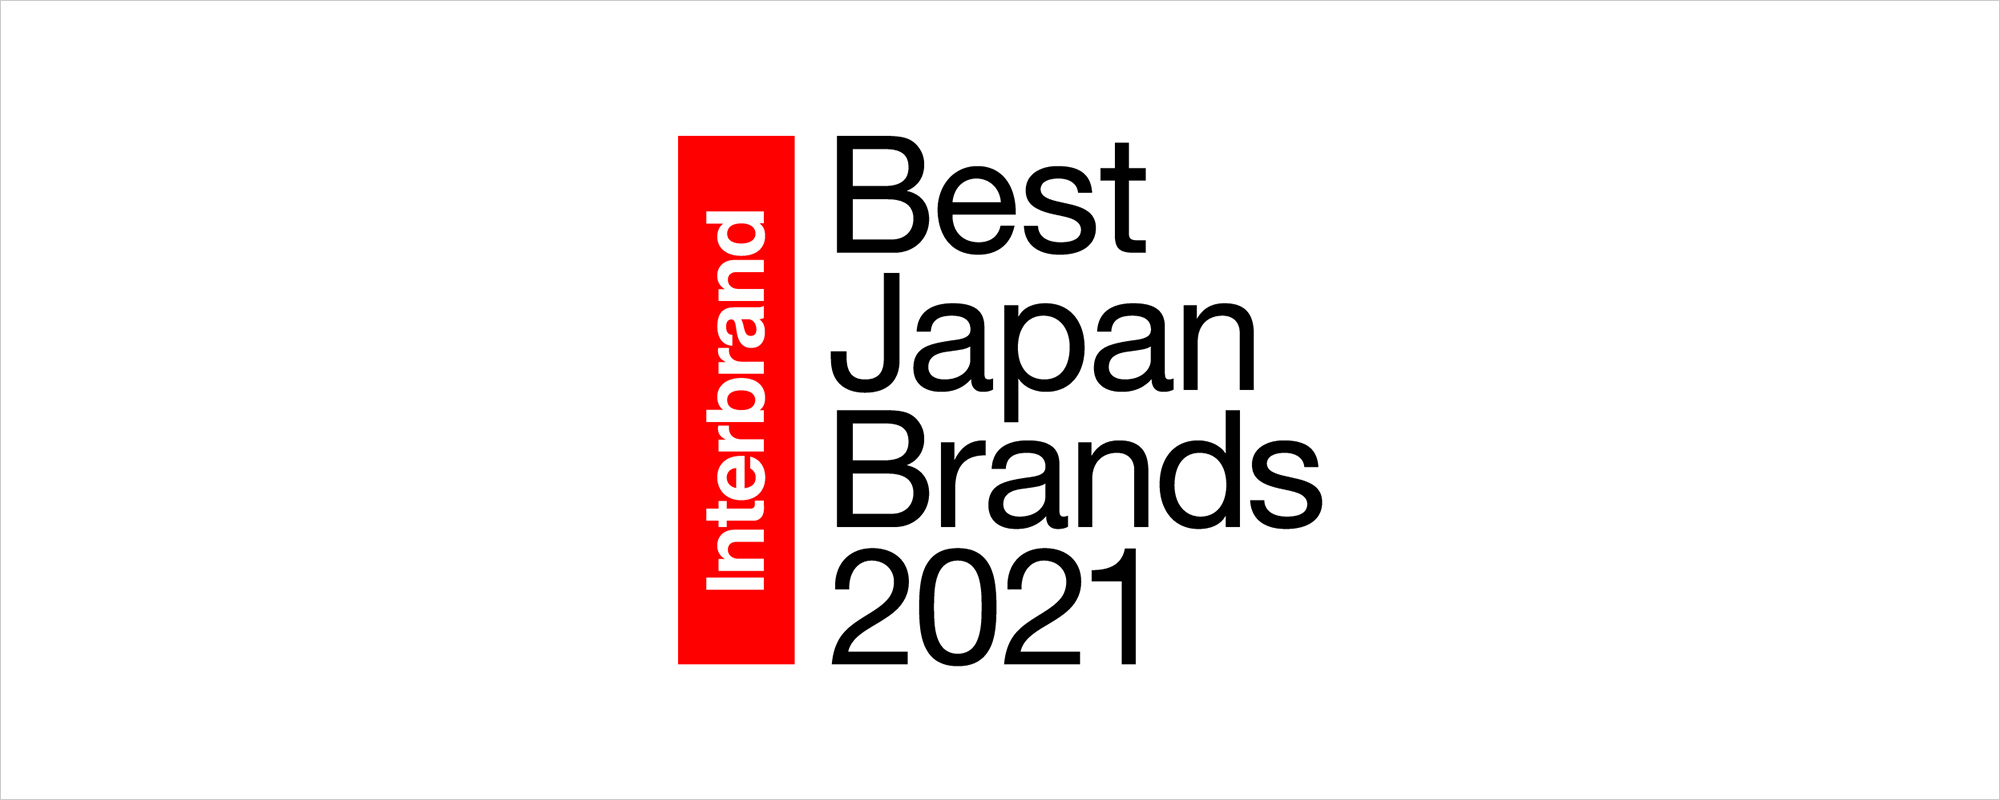 [ Image ] Yamaha Brand Rises to Rank No. 30 in the “Best Japan Brands 2021”